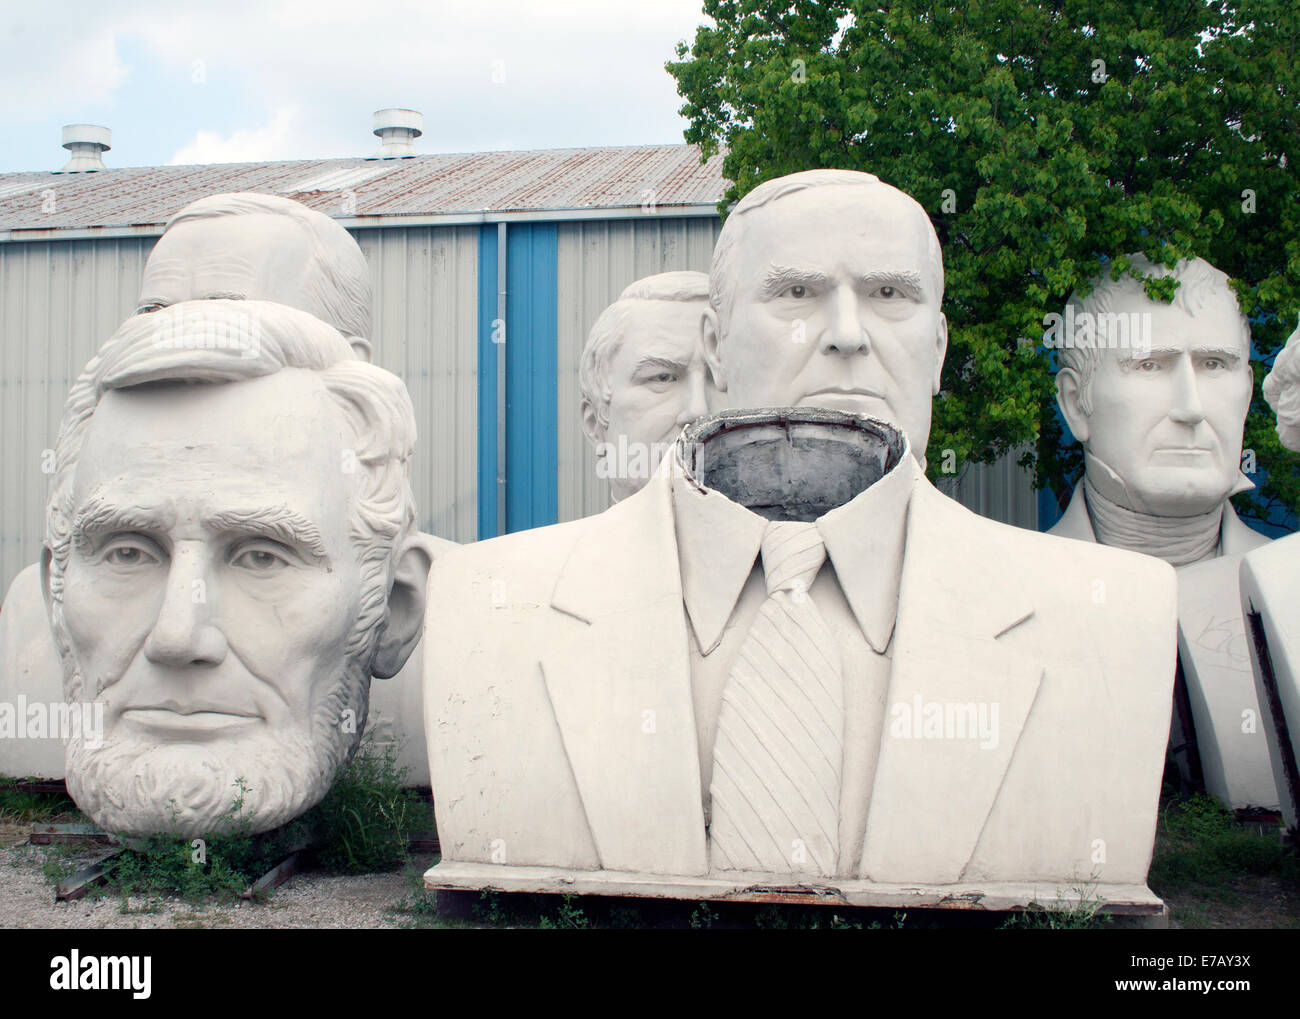 Giant sculpture of American Presidents heads in Houston Texas Stock Photo